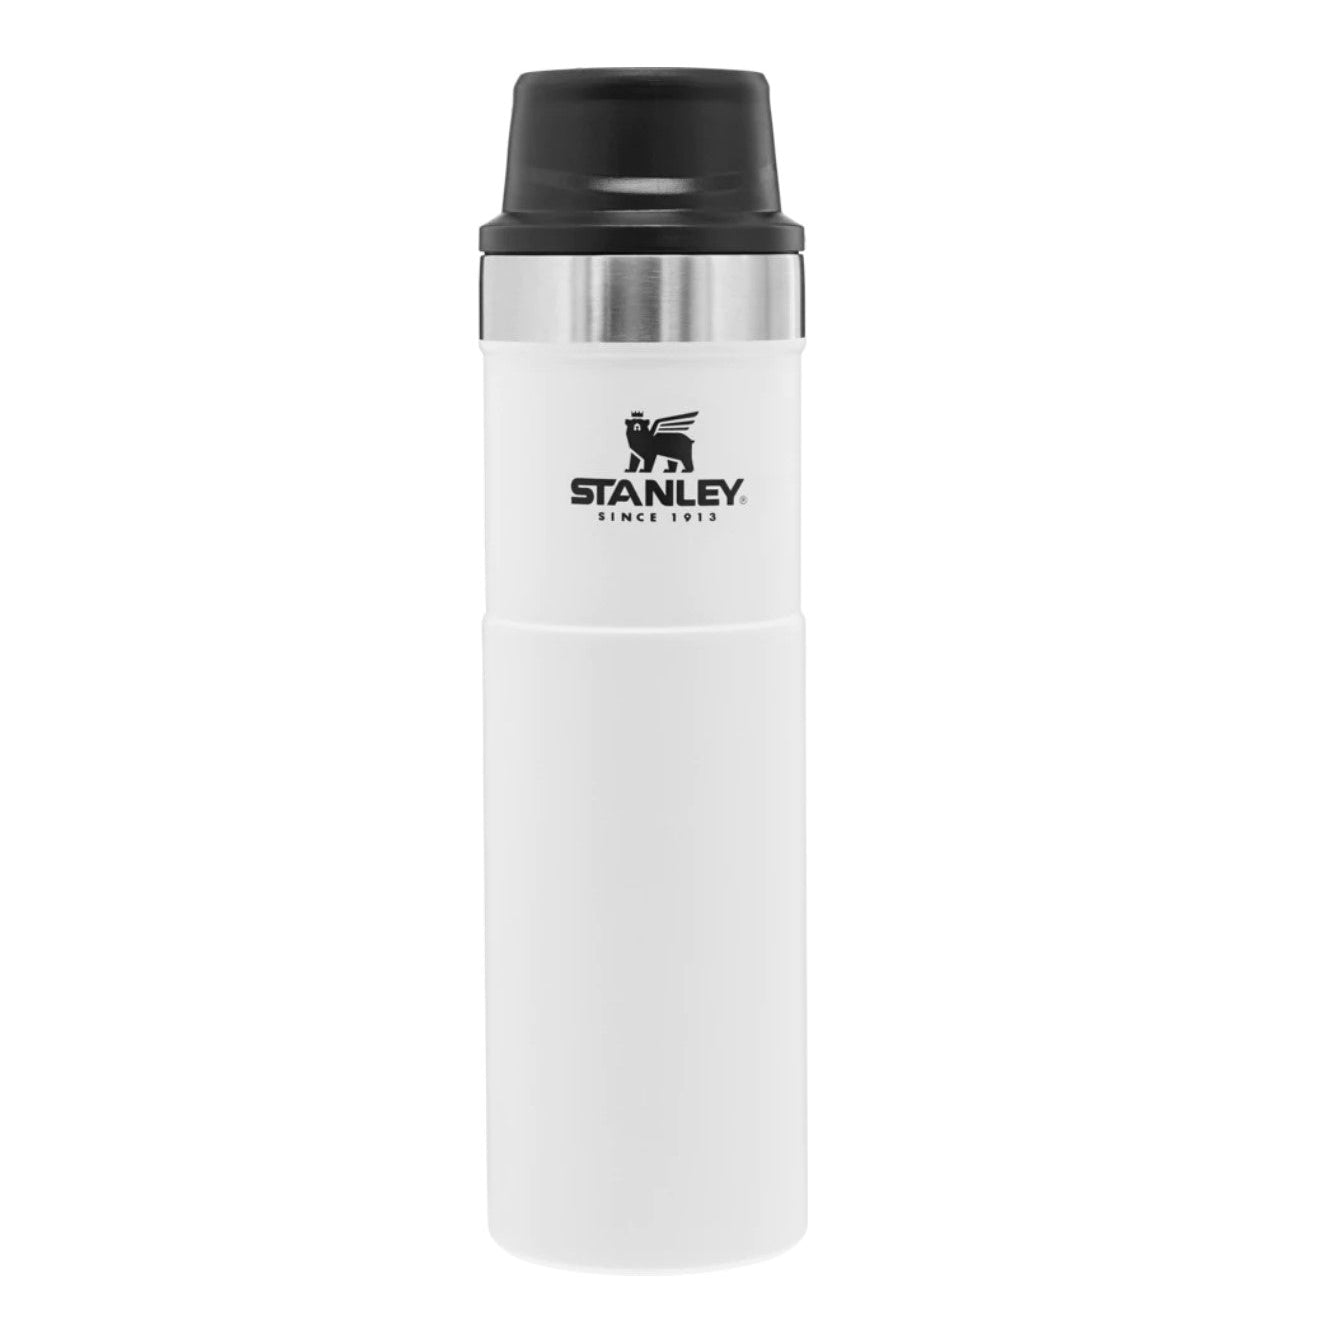 Stanley Classic Series The Trigger Action Travel Mug 20oz Green